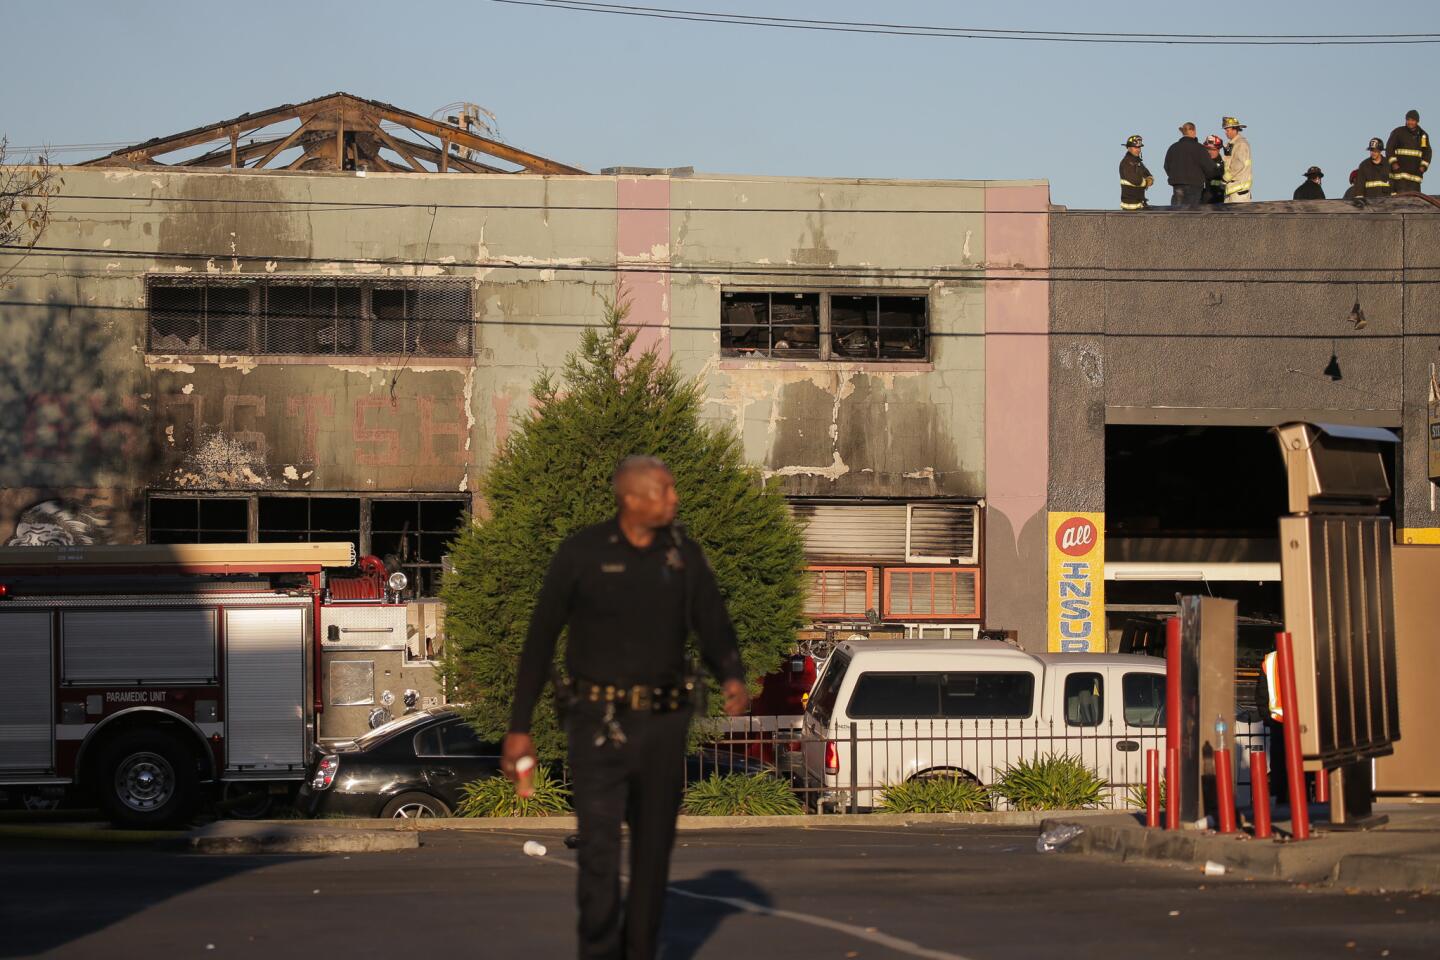 Firefighters and police work at the scene of an overnight fire on Dec. 3, 2016 in Oakland, California.